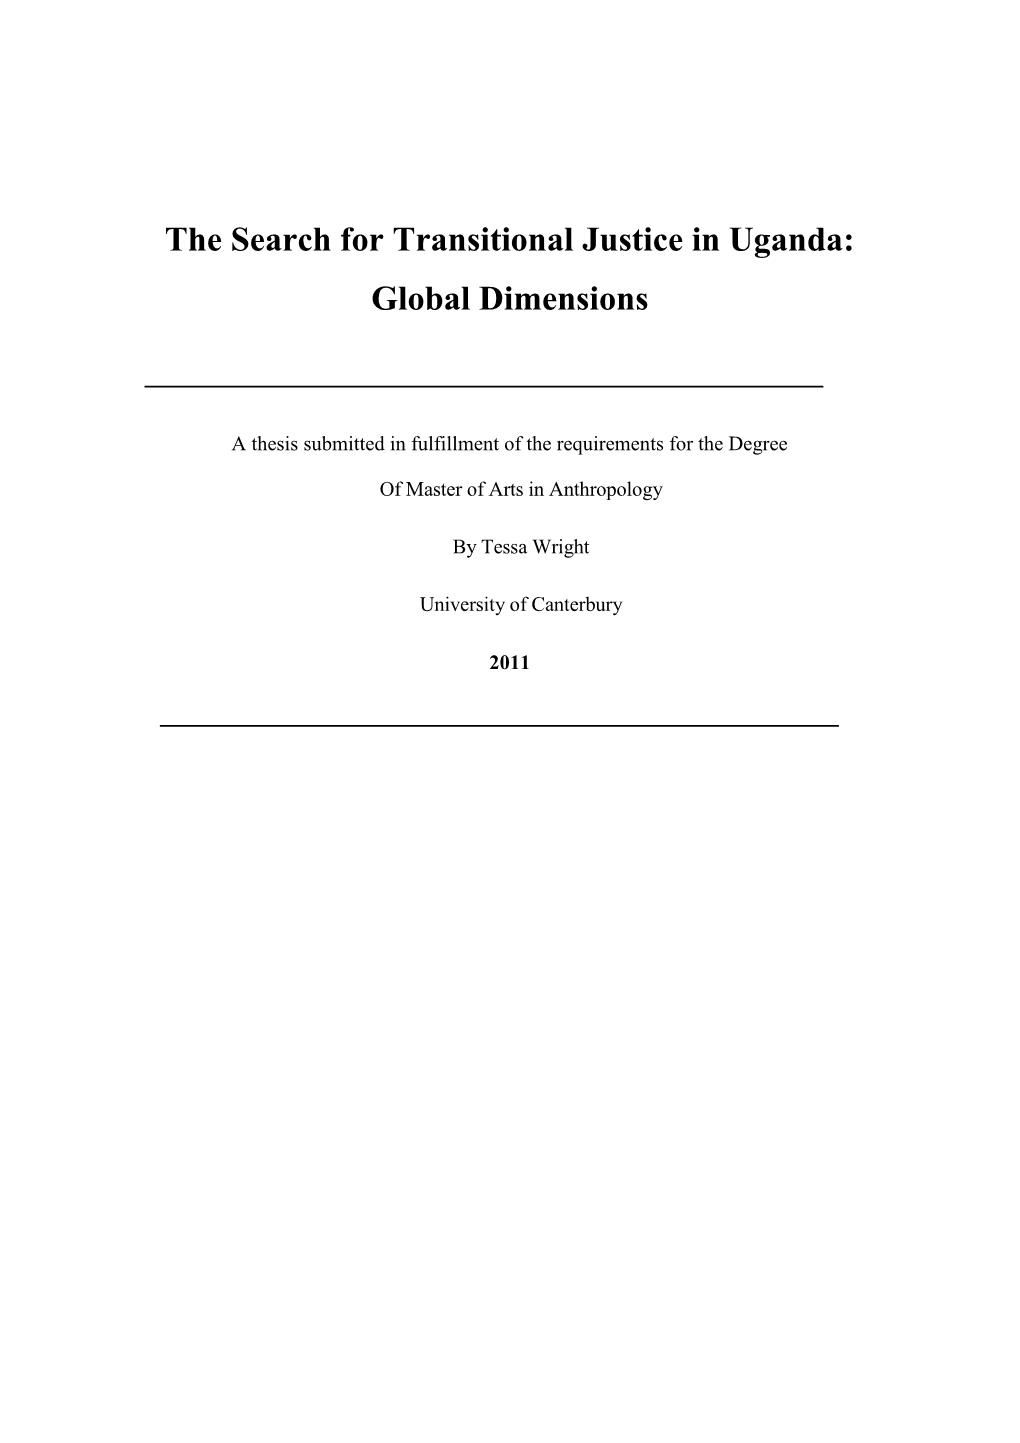 The Search for Transitional Justice in Uganda: Global Dimensions